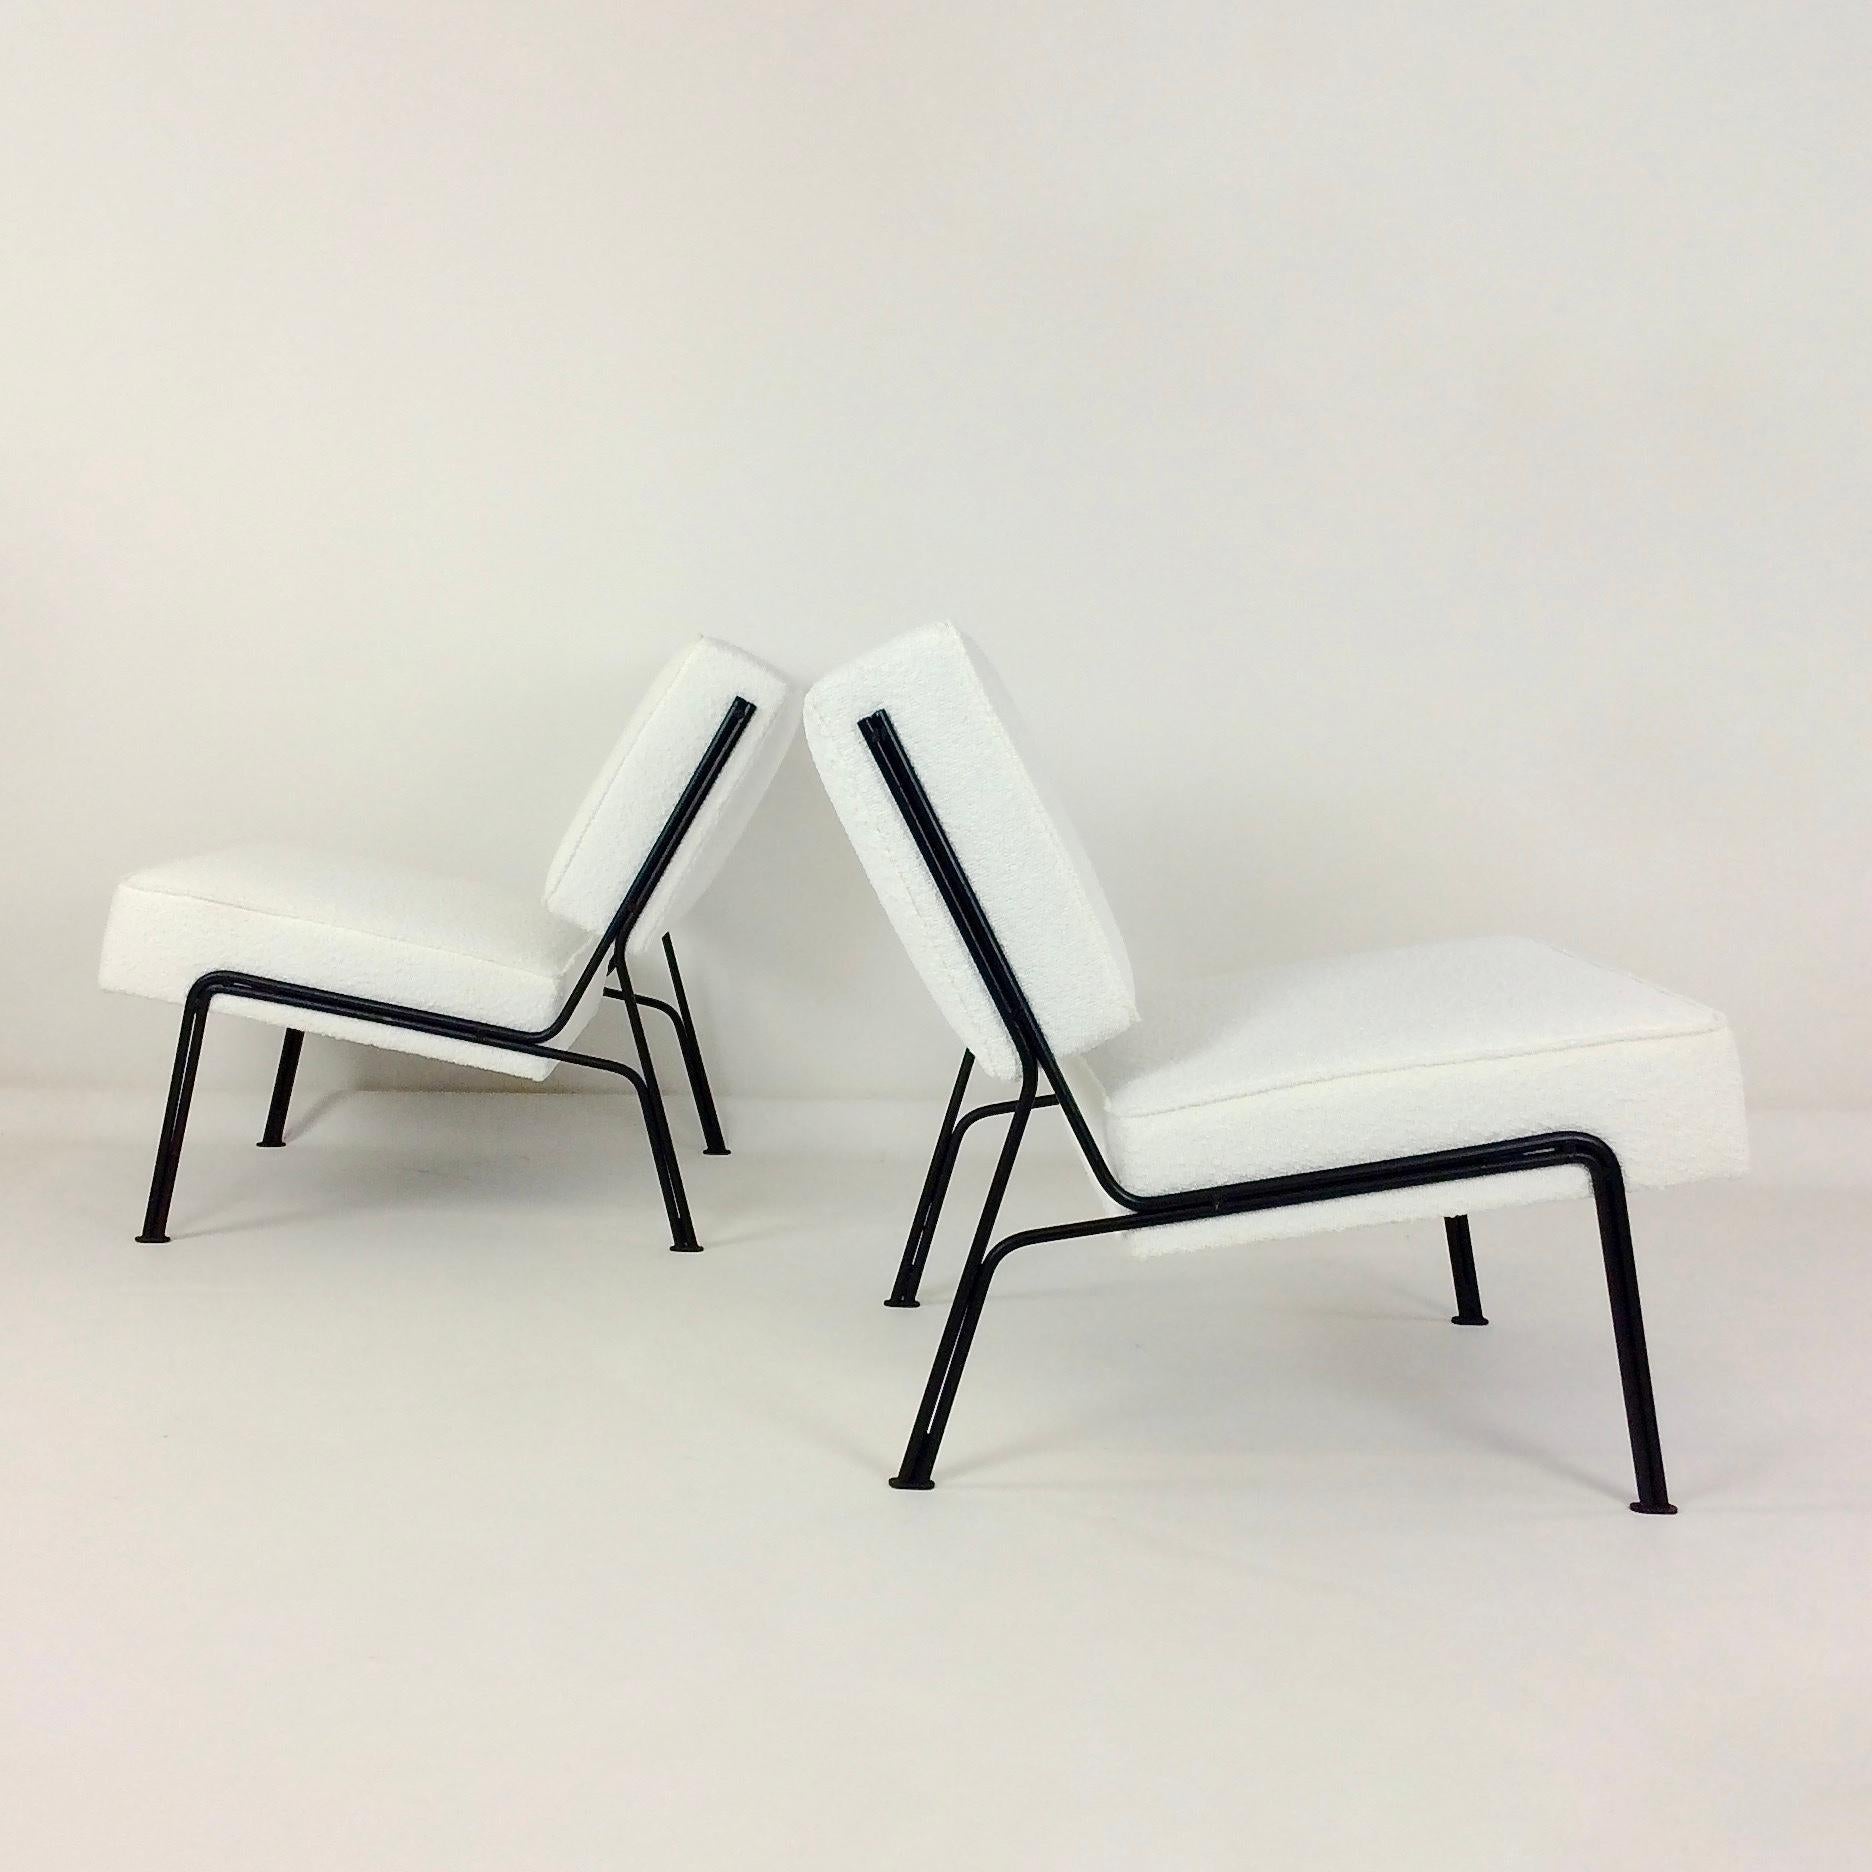 Pair of G2 Chairs By A.R.P. Guariche, Motte, Mortier for Airborne, 1953, France. For Sale 1